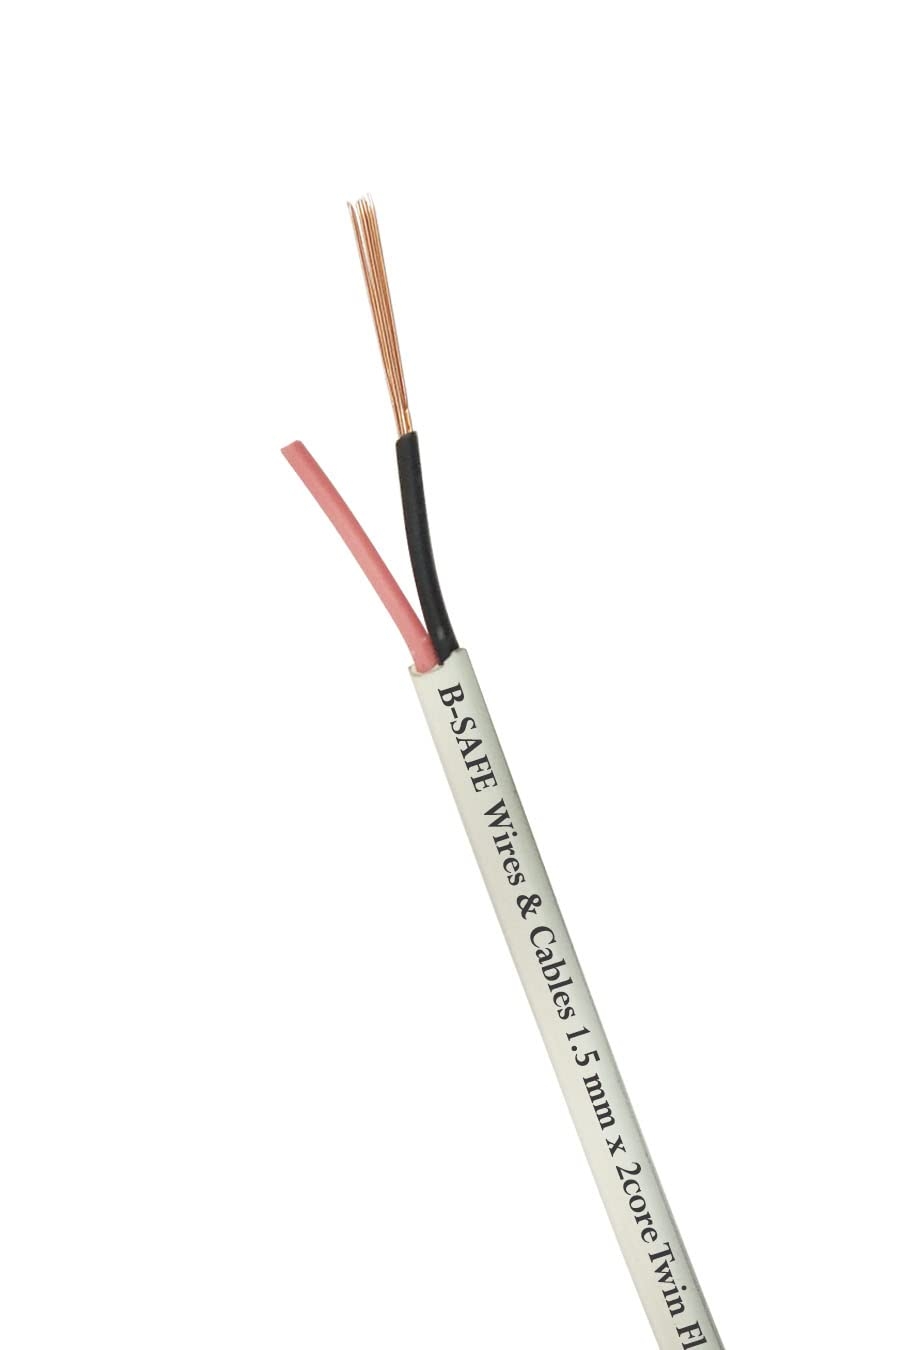 Clever Pocket B-Safe Twin Flat 1.5mm x 2 core Copper Cables | Double Layer PVC Insulation - 18 Meter / 59 feet